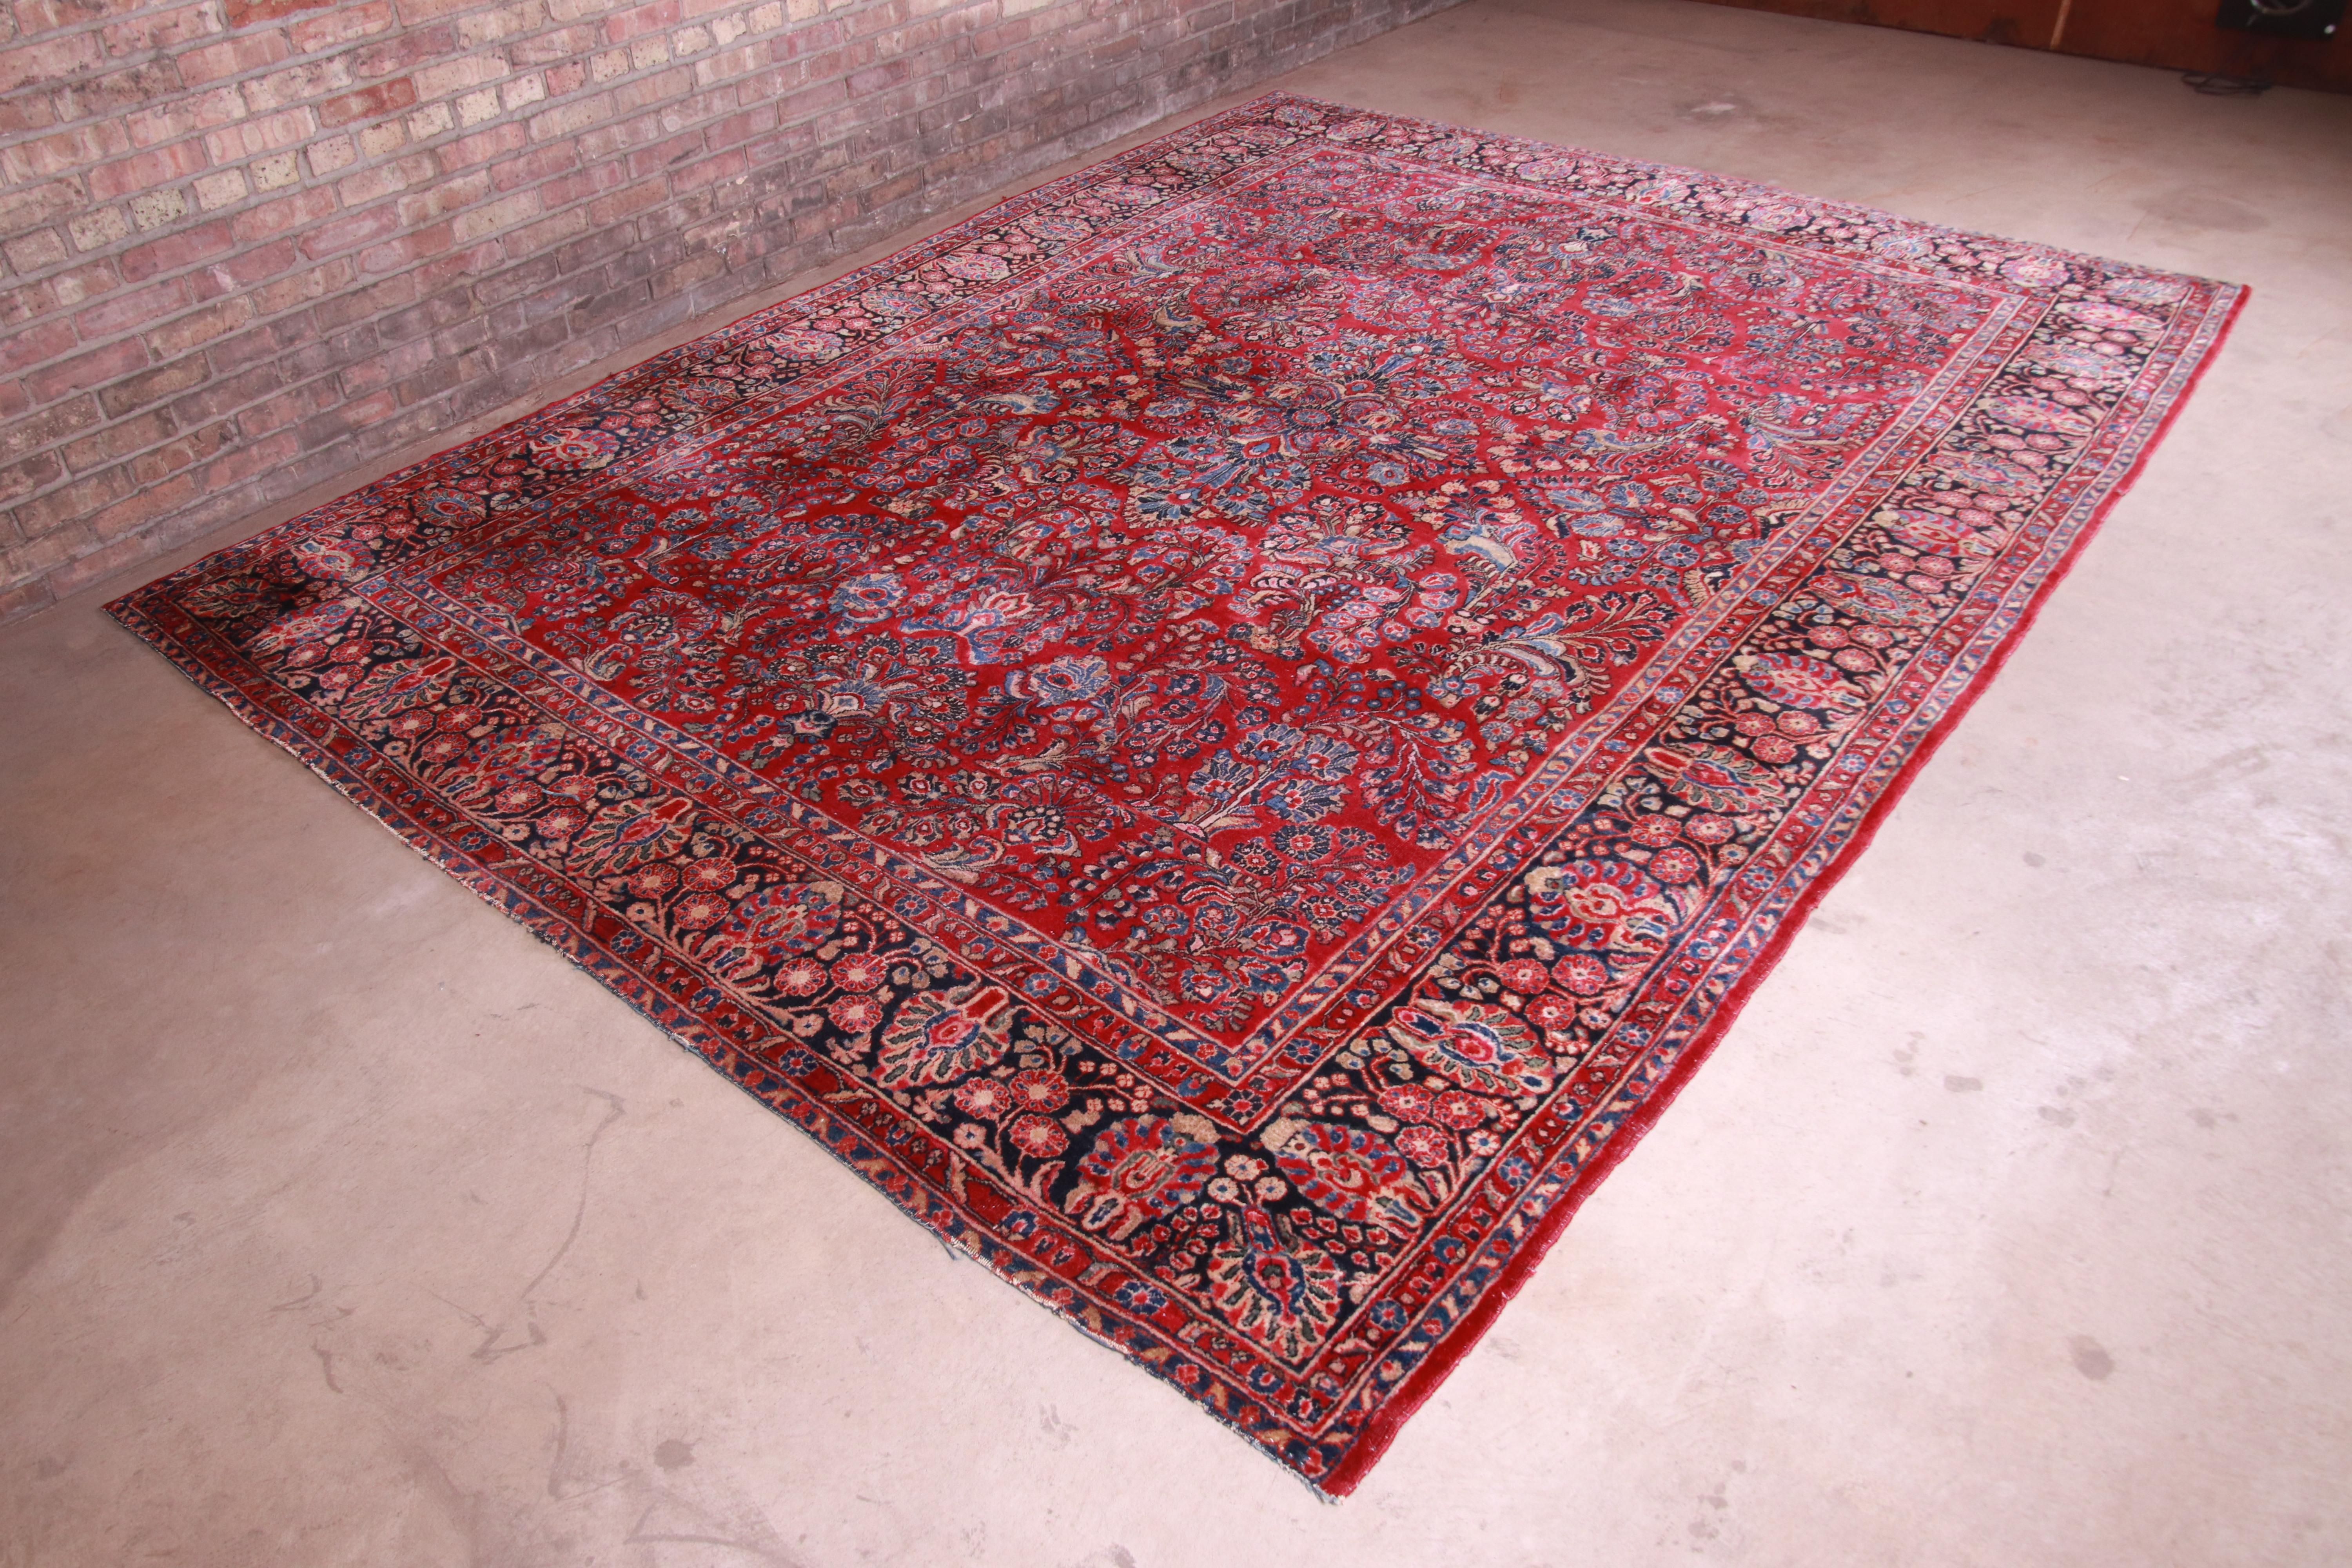 A gorgeous antique hand knotted Persian Sarouk room size rug

Persia, circa 1930s

Classic design with floral sprays and bouquets

Measures: 8